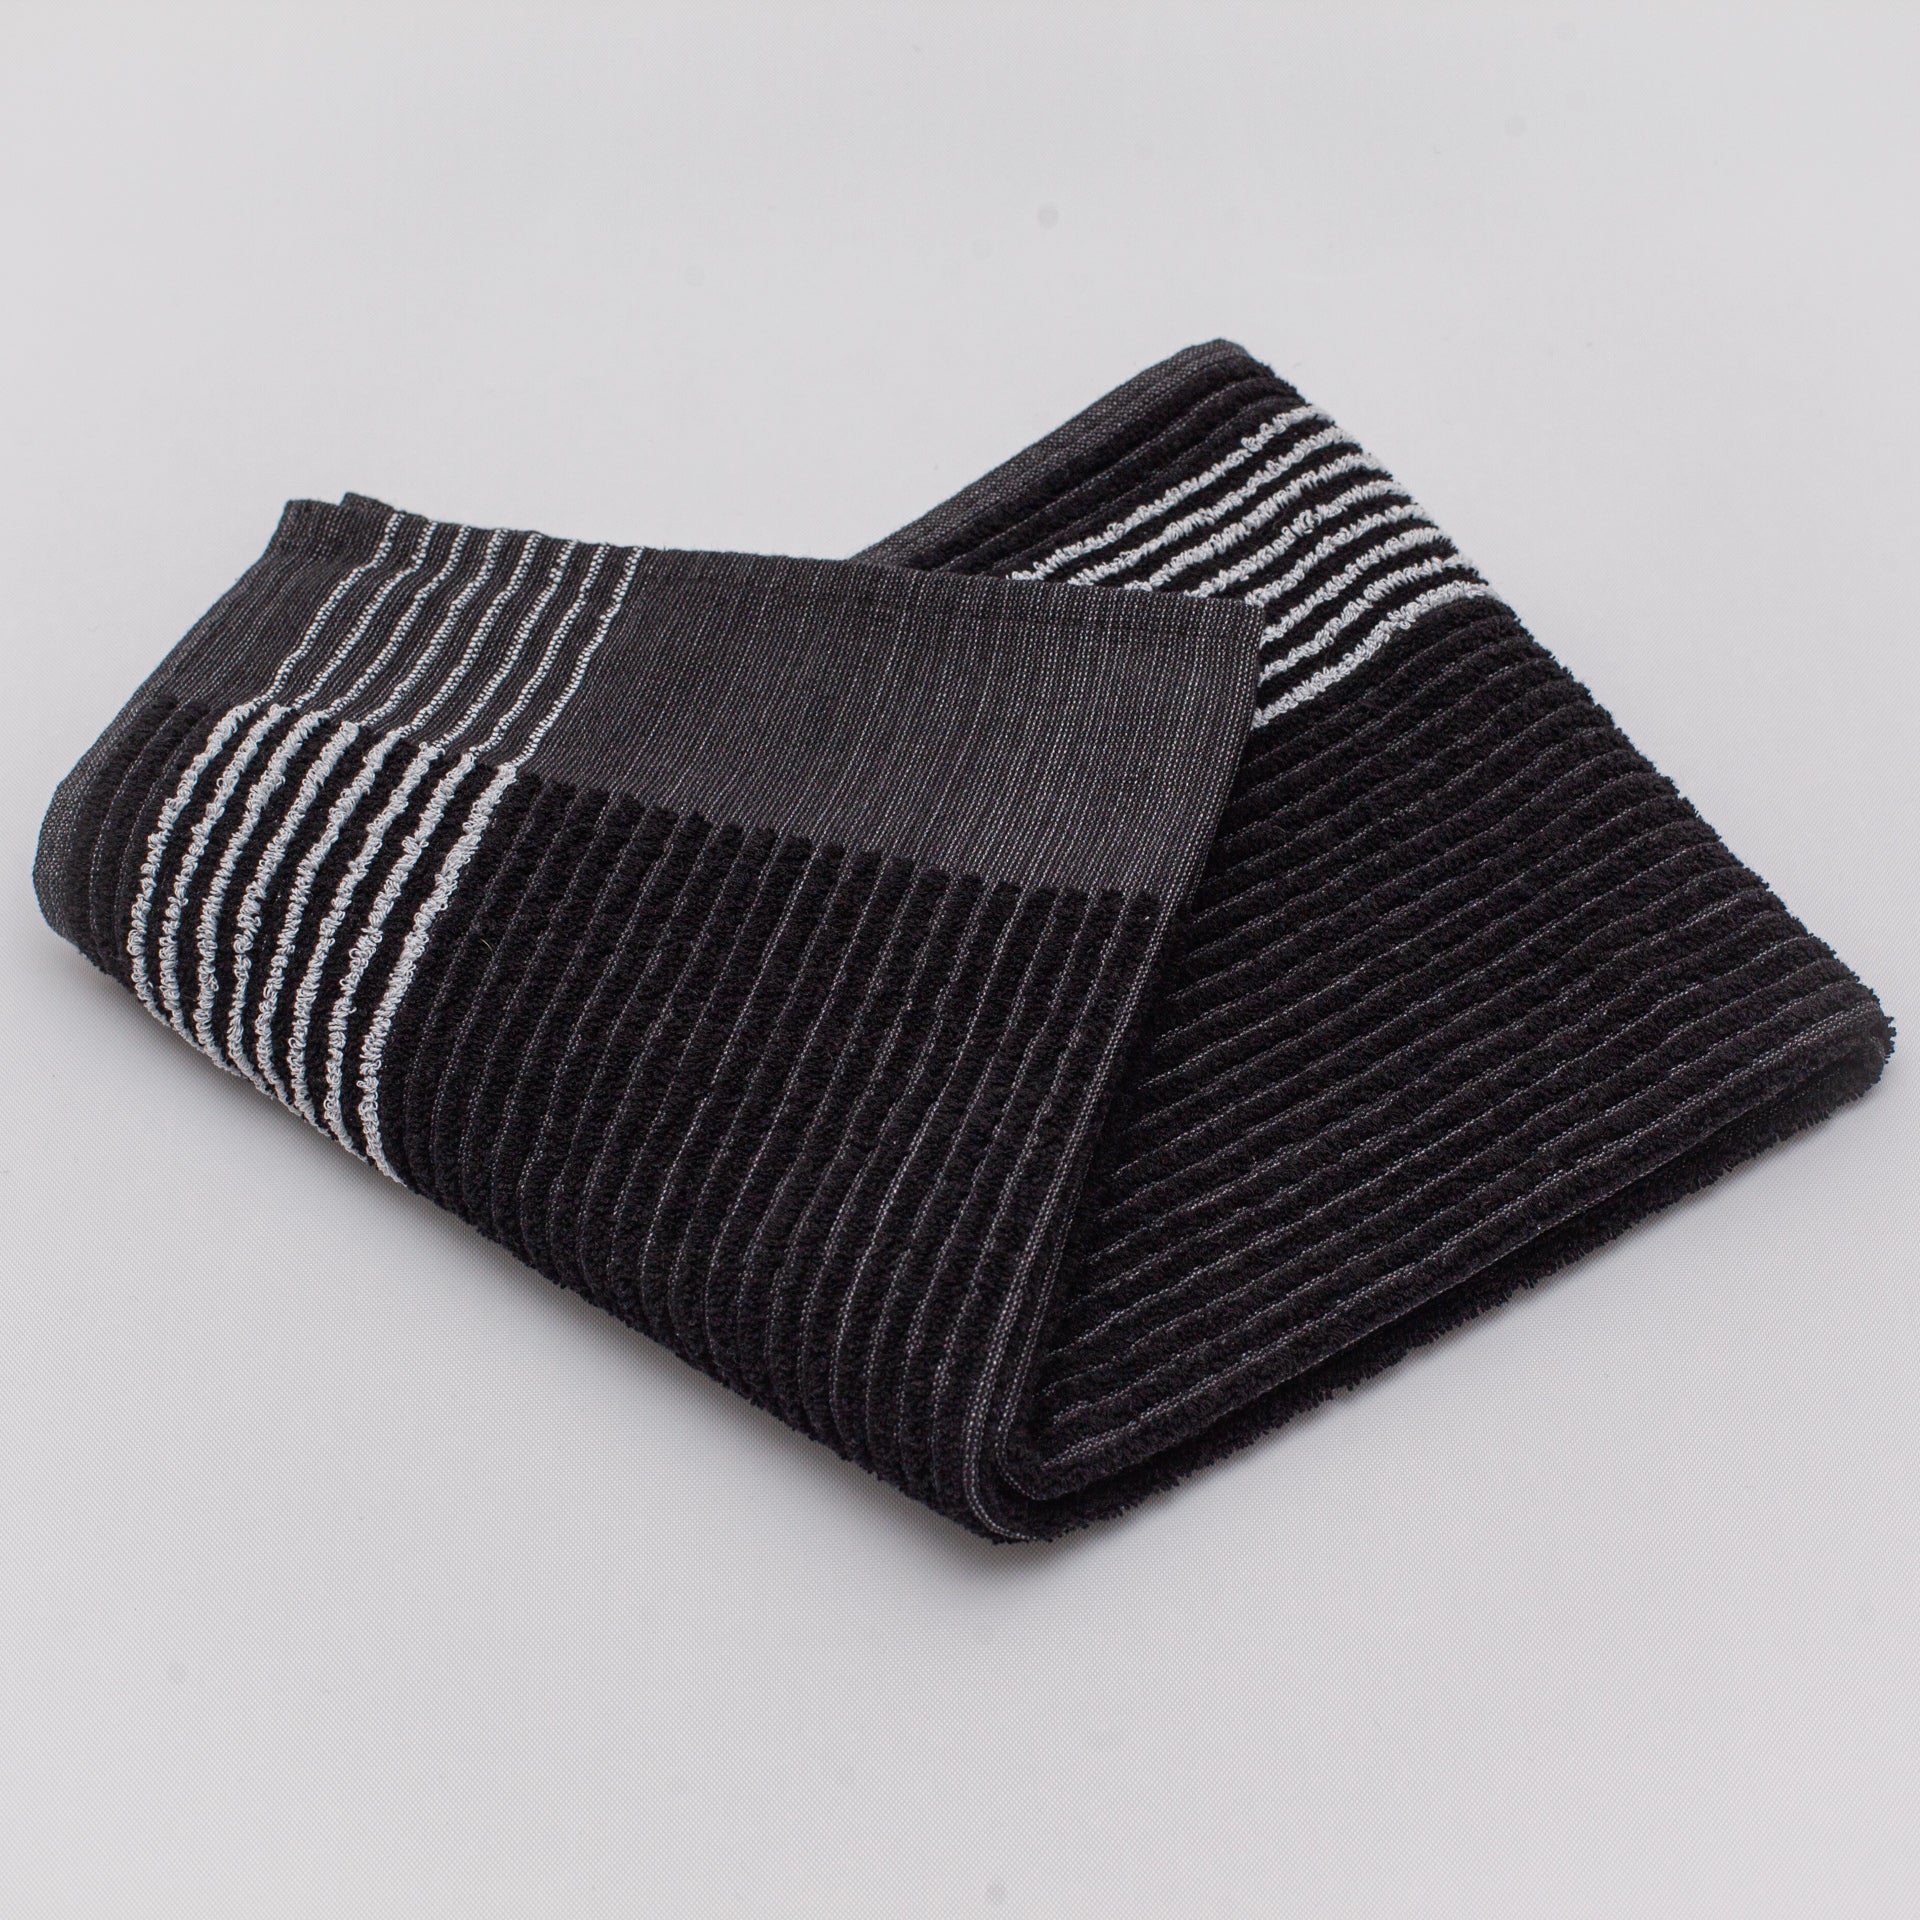 black caddy towel for golf with white stripes